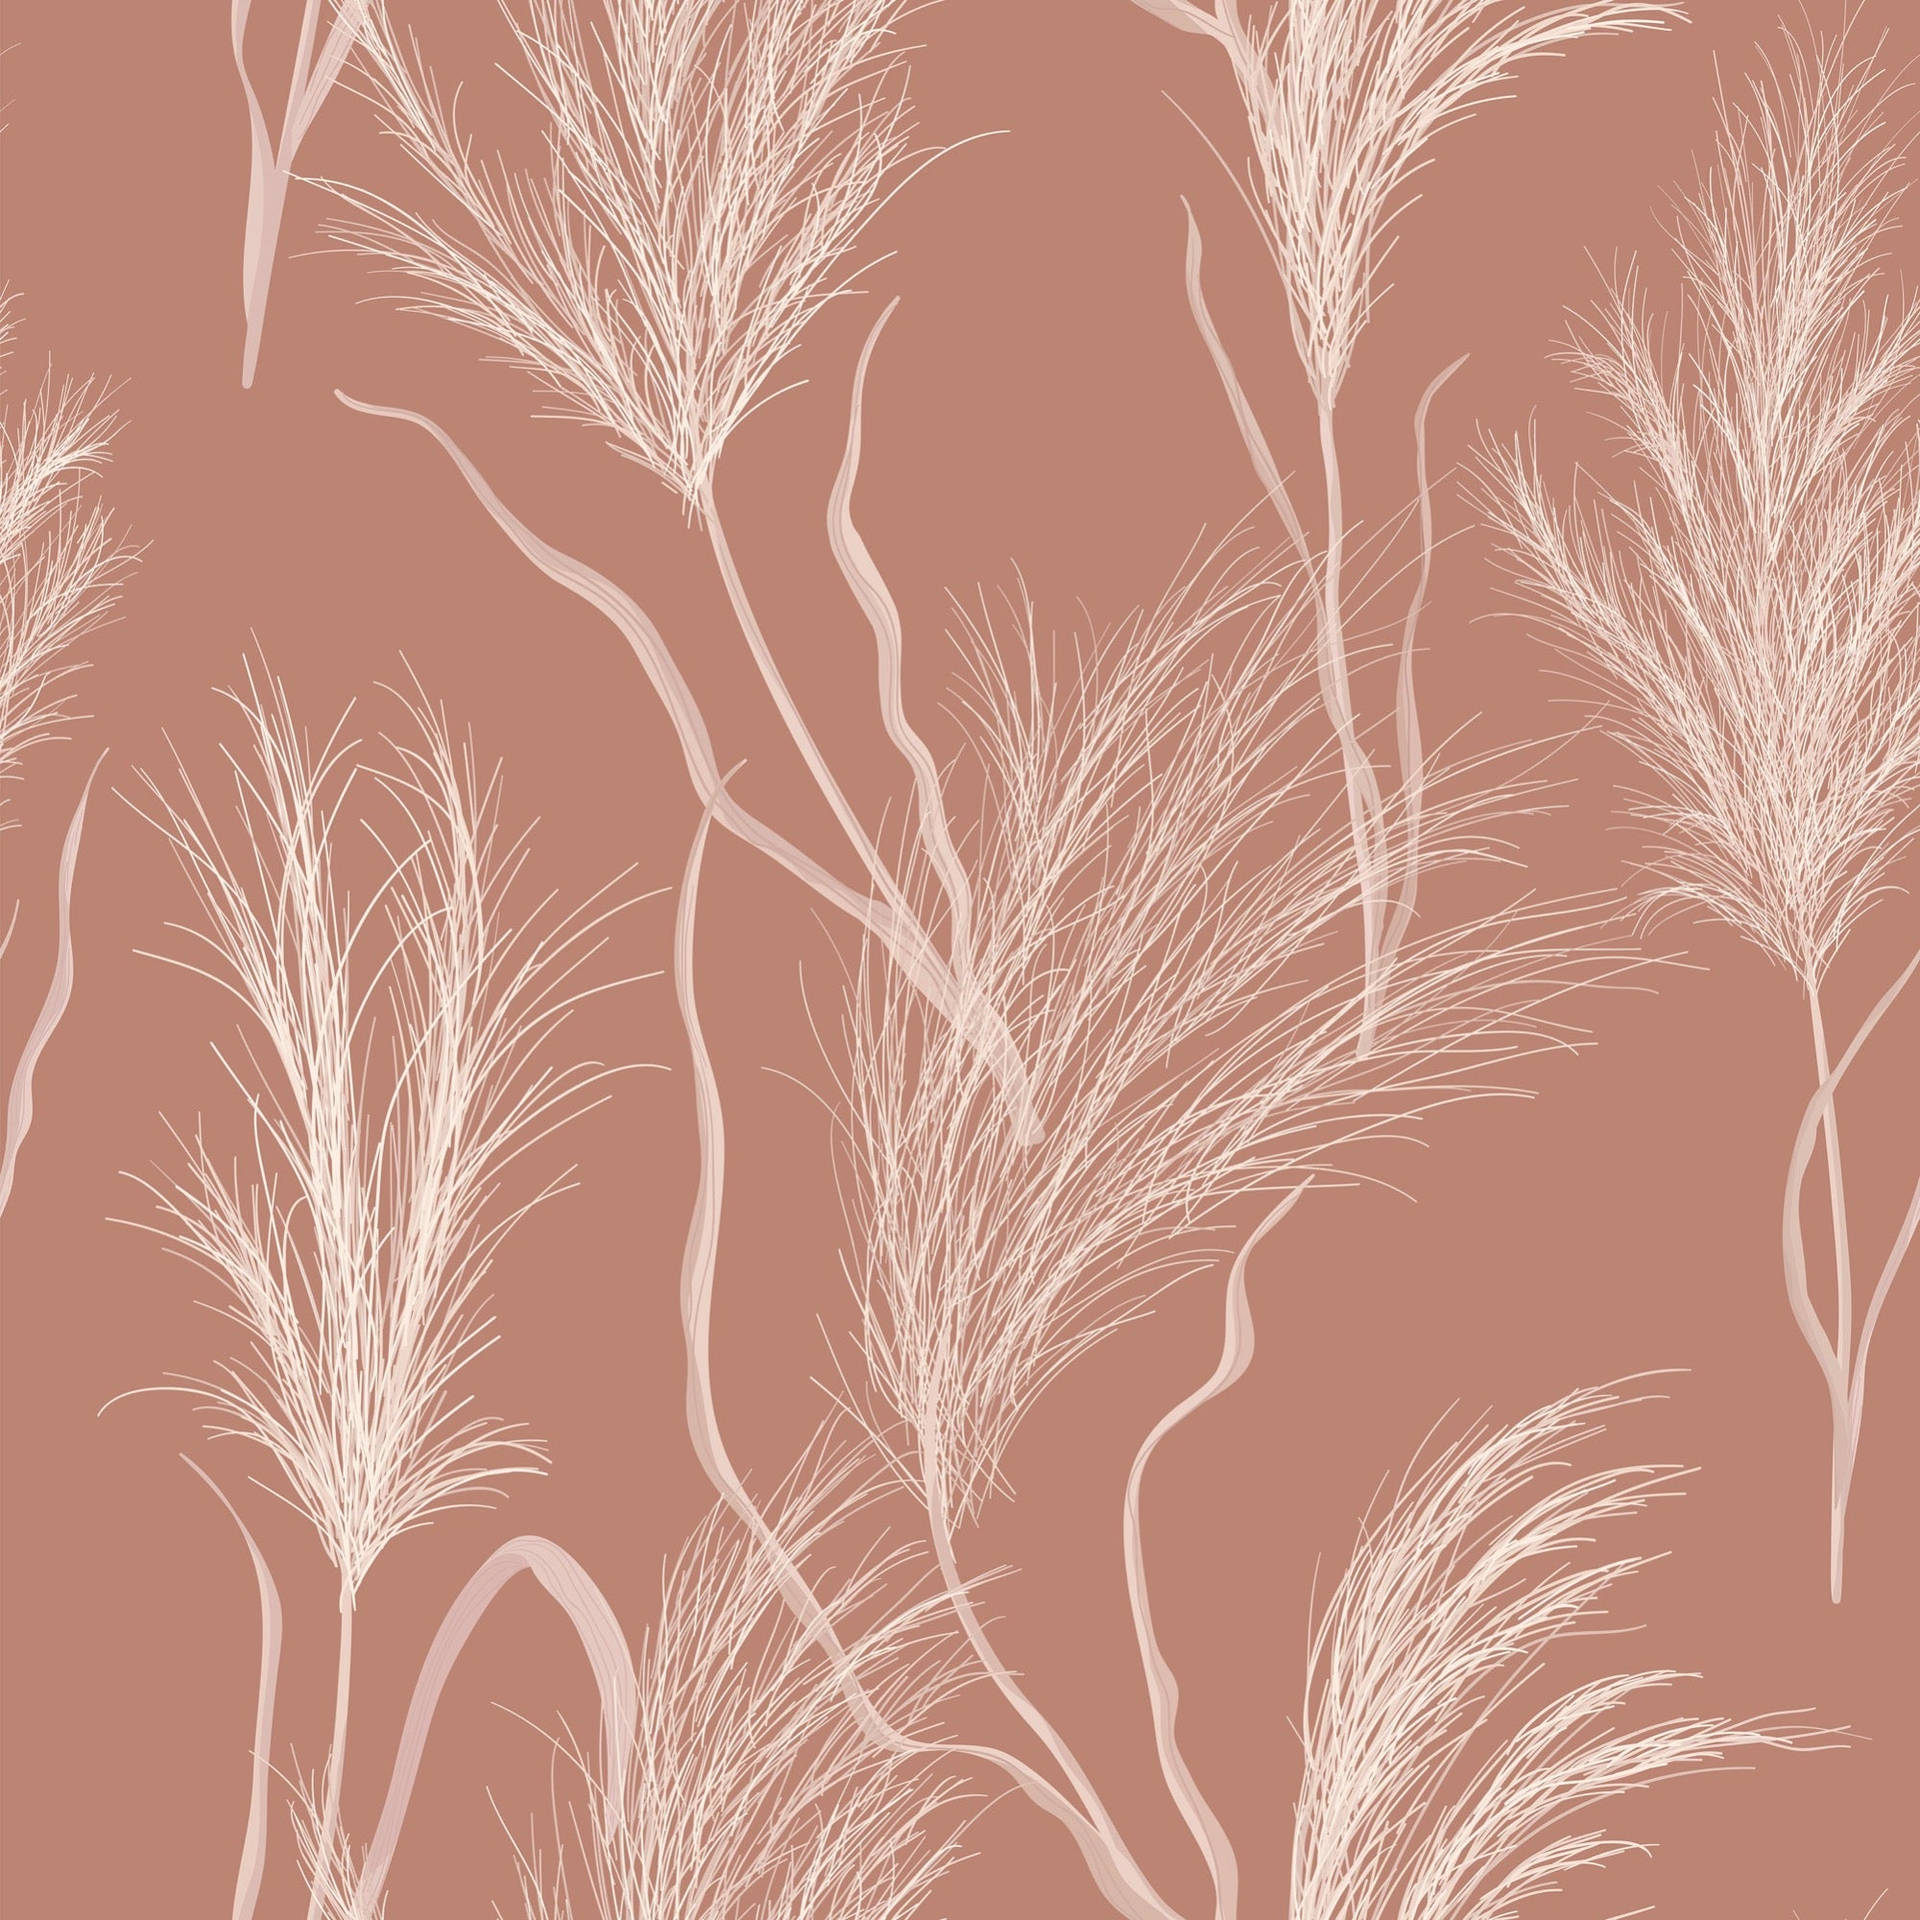 a pattern of grasses on a pink background Wallpaper